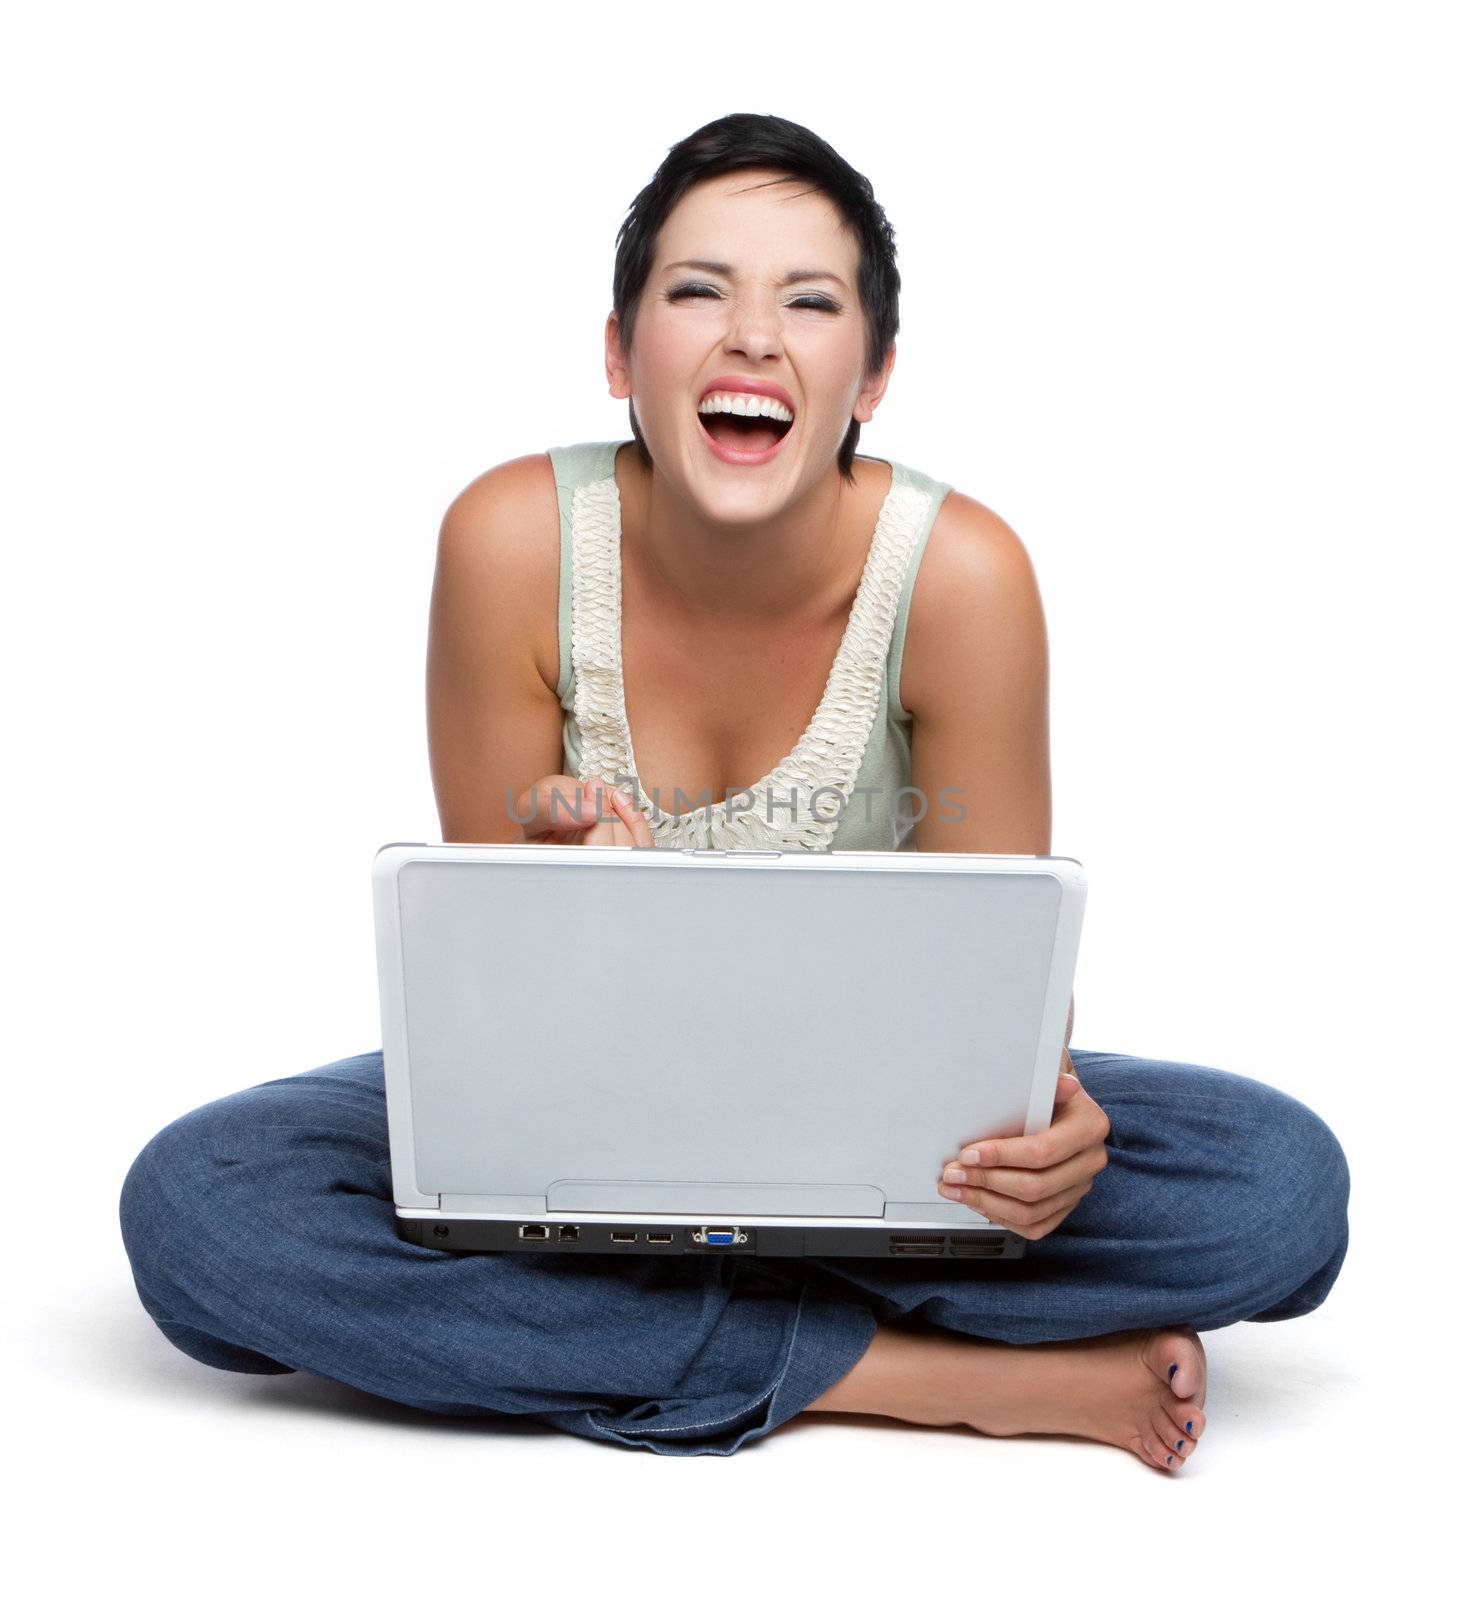 Laughing Laptop Woman by keeweeboy